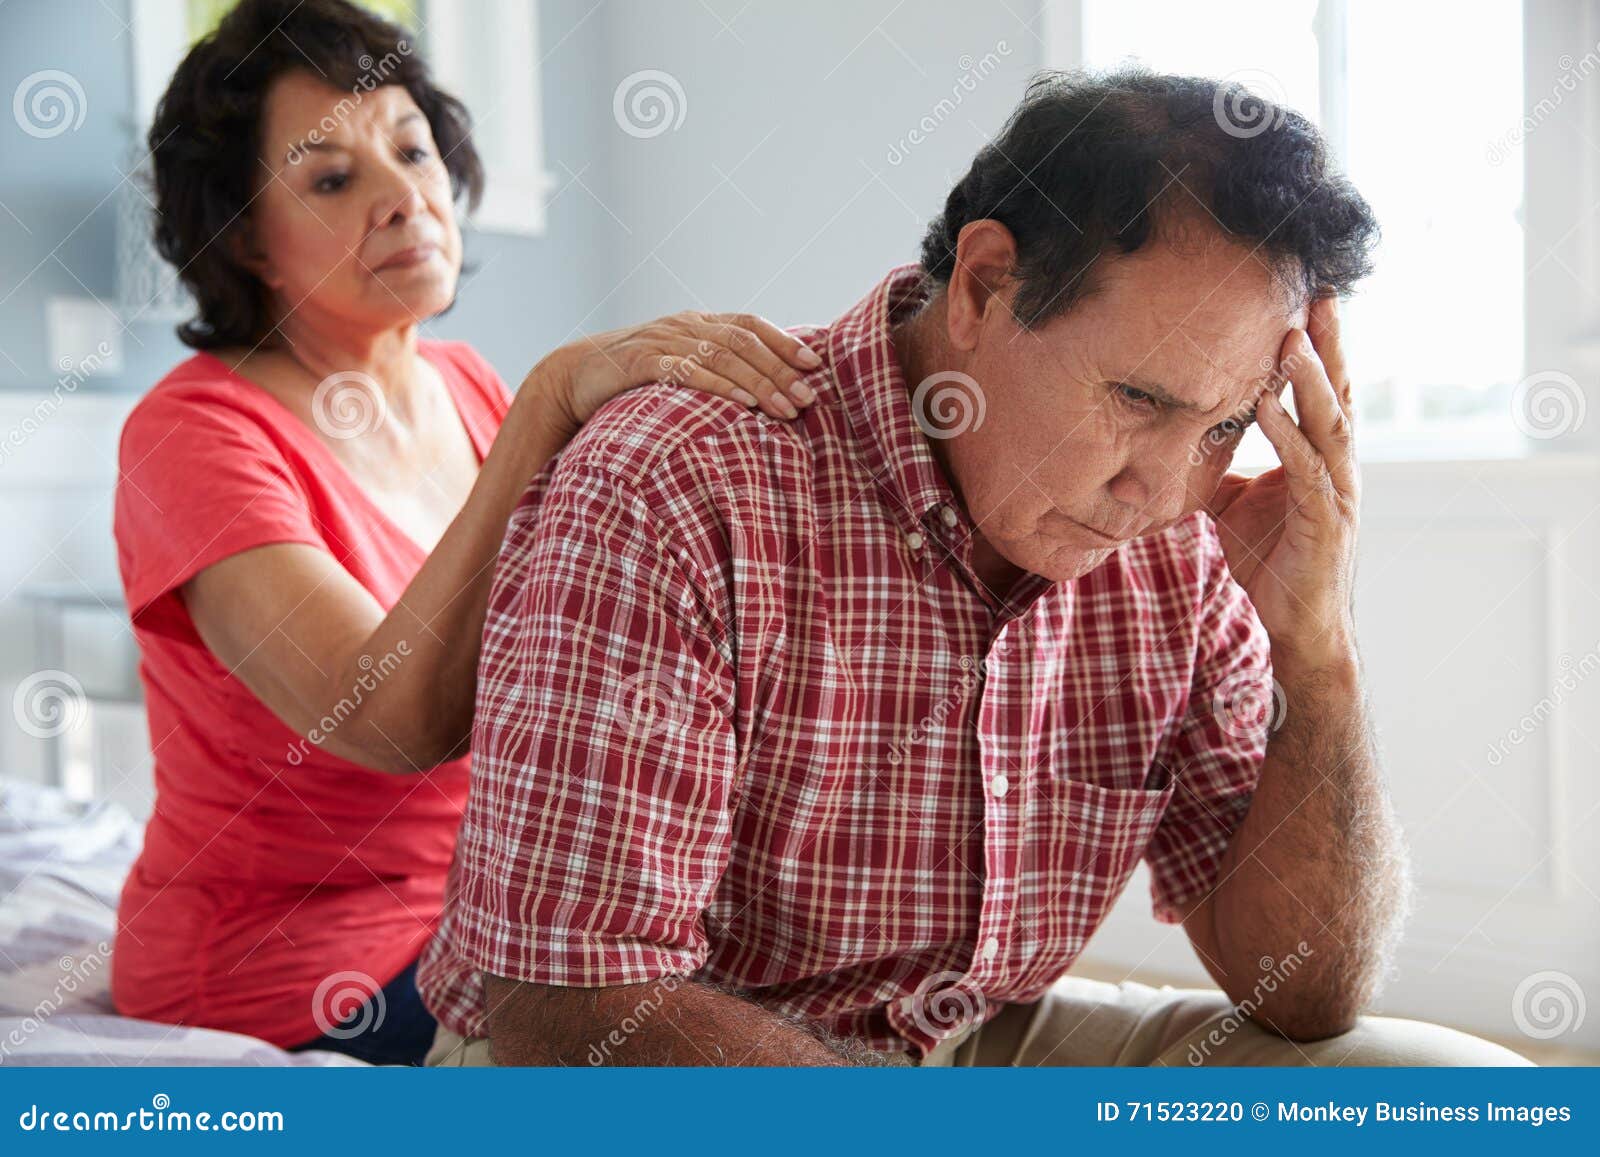 wife comforting senior husband suffering with dementia